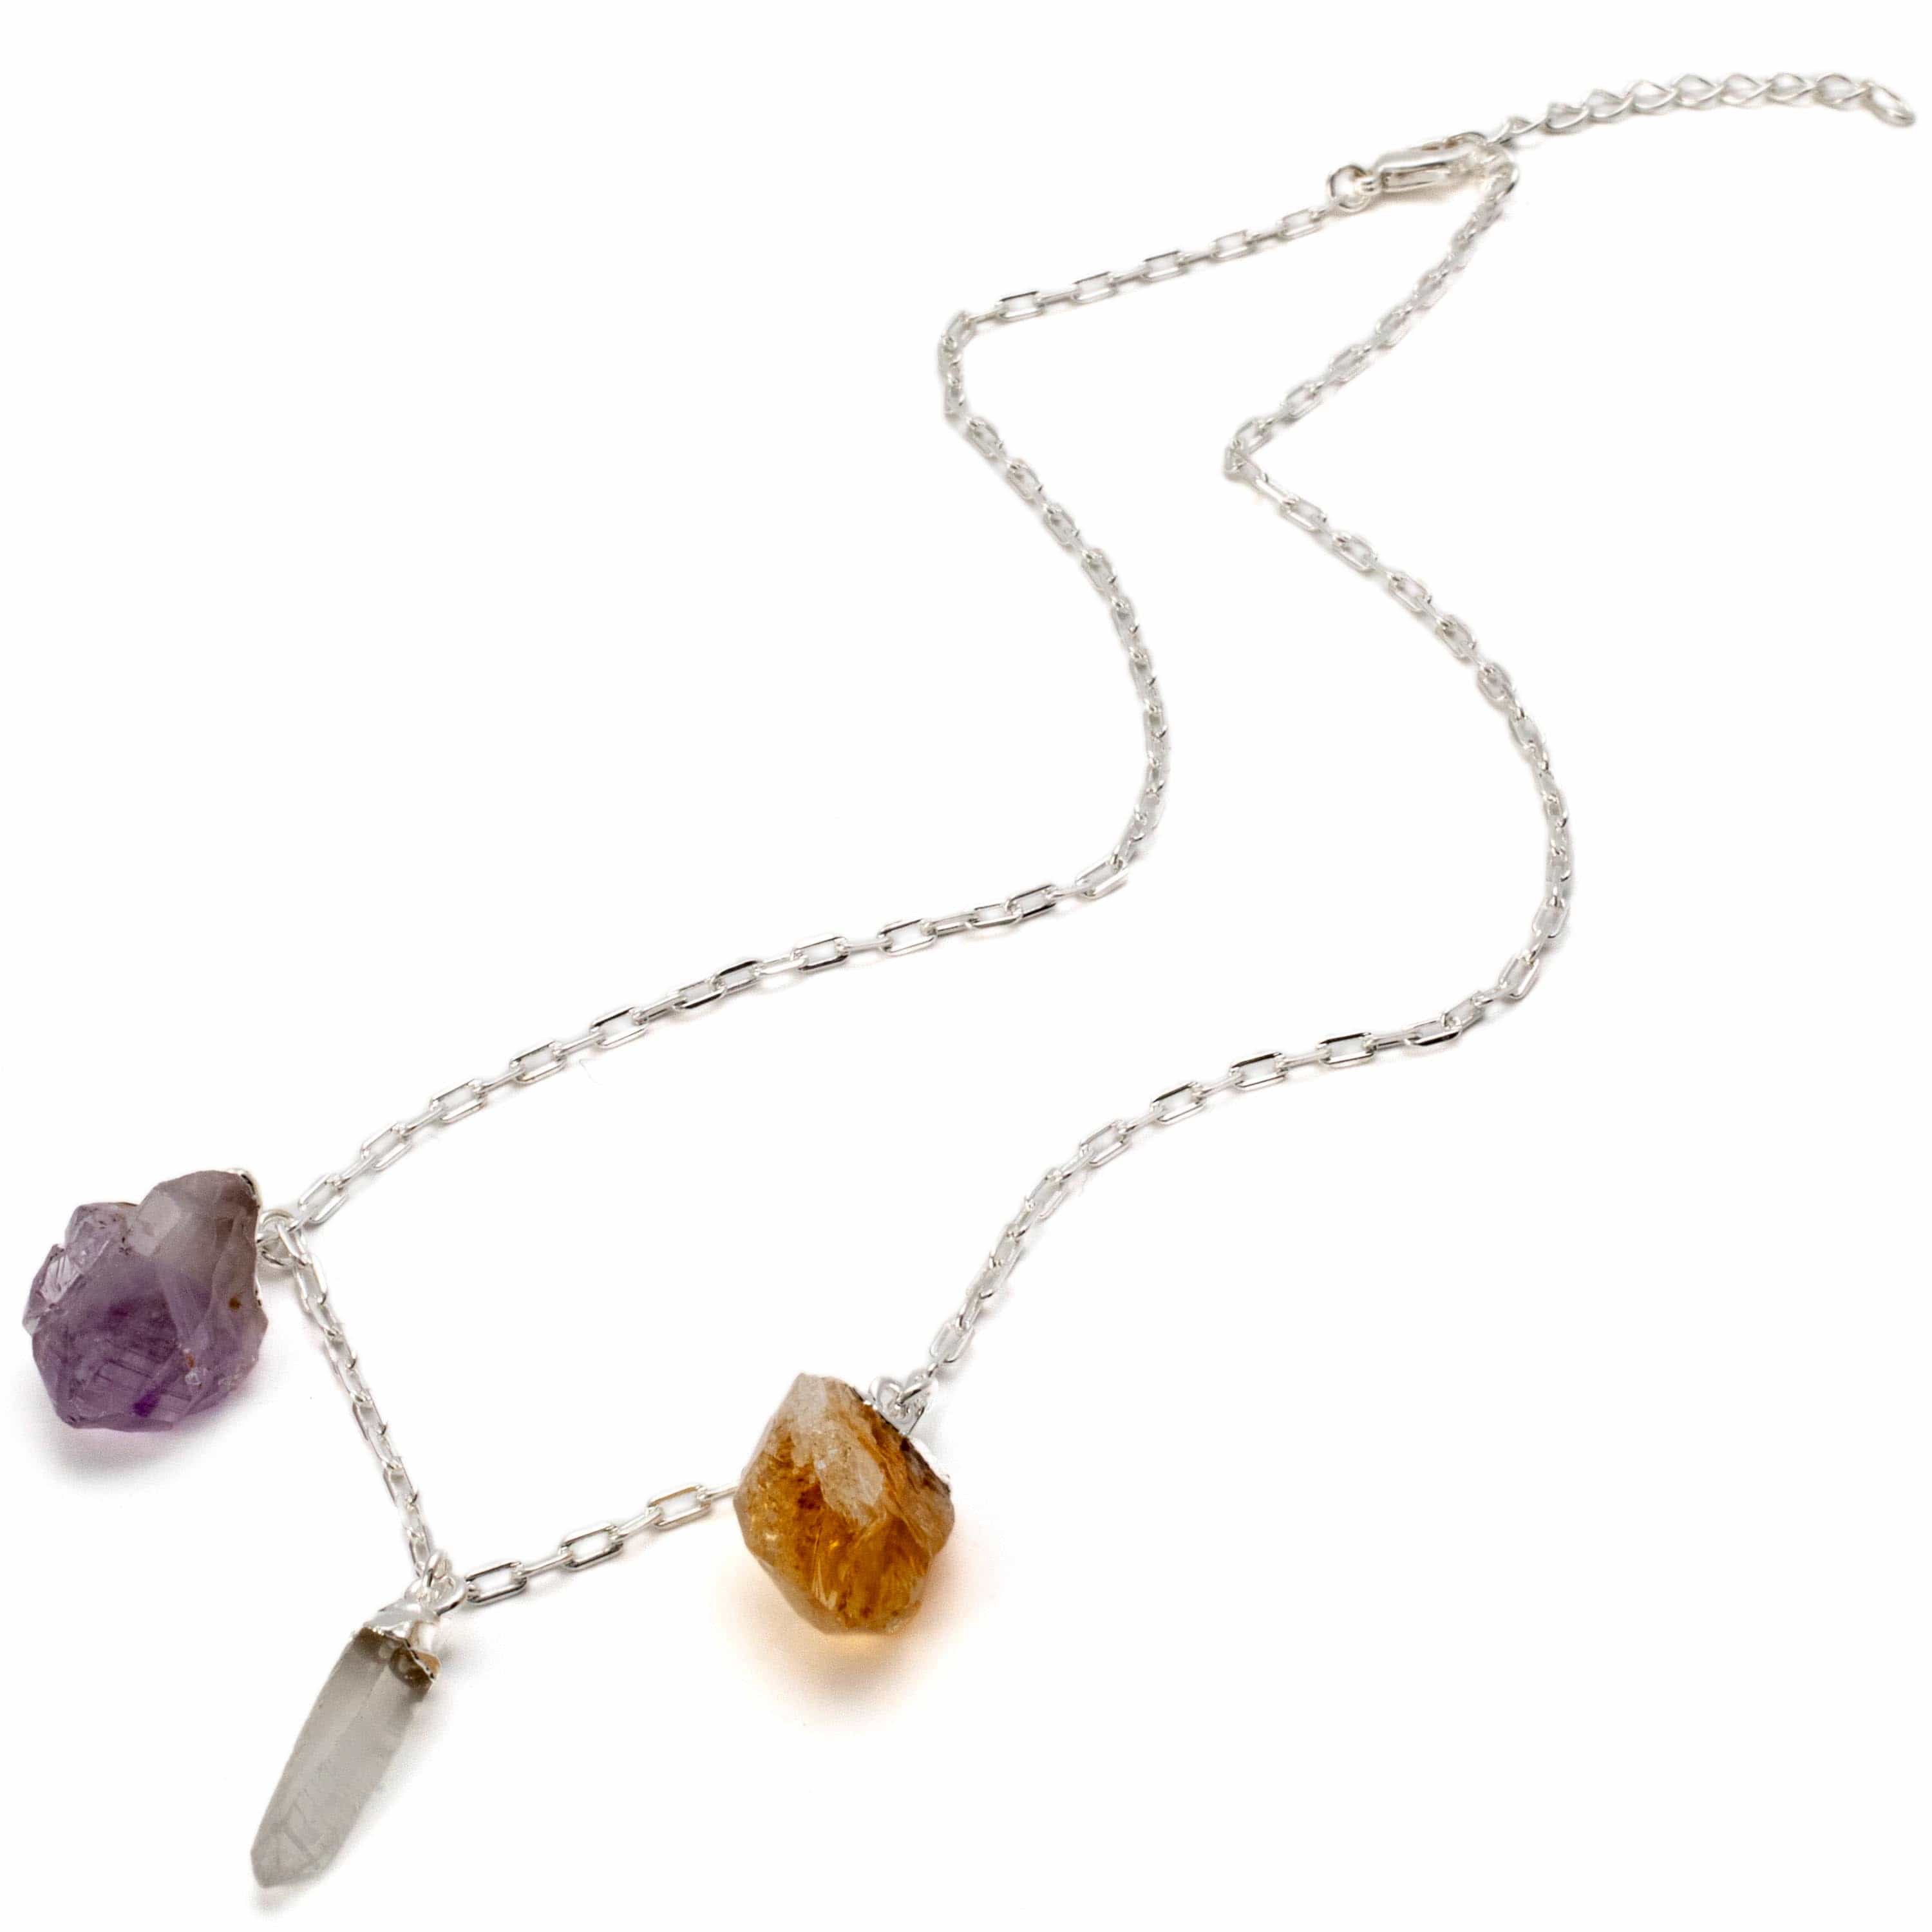 Kalifano Crystal Jewelry Amethyst, Citrine, and Quartz Triple Point Necklace CJN-2042-A+C+Q